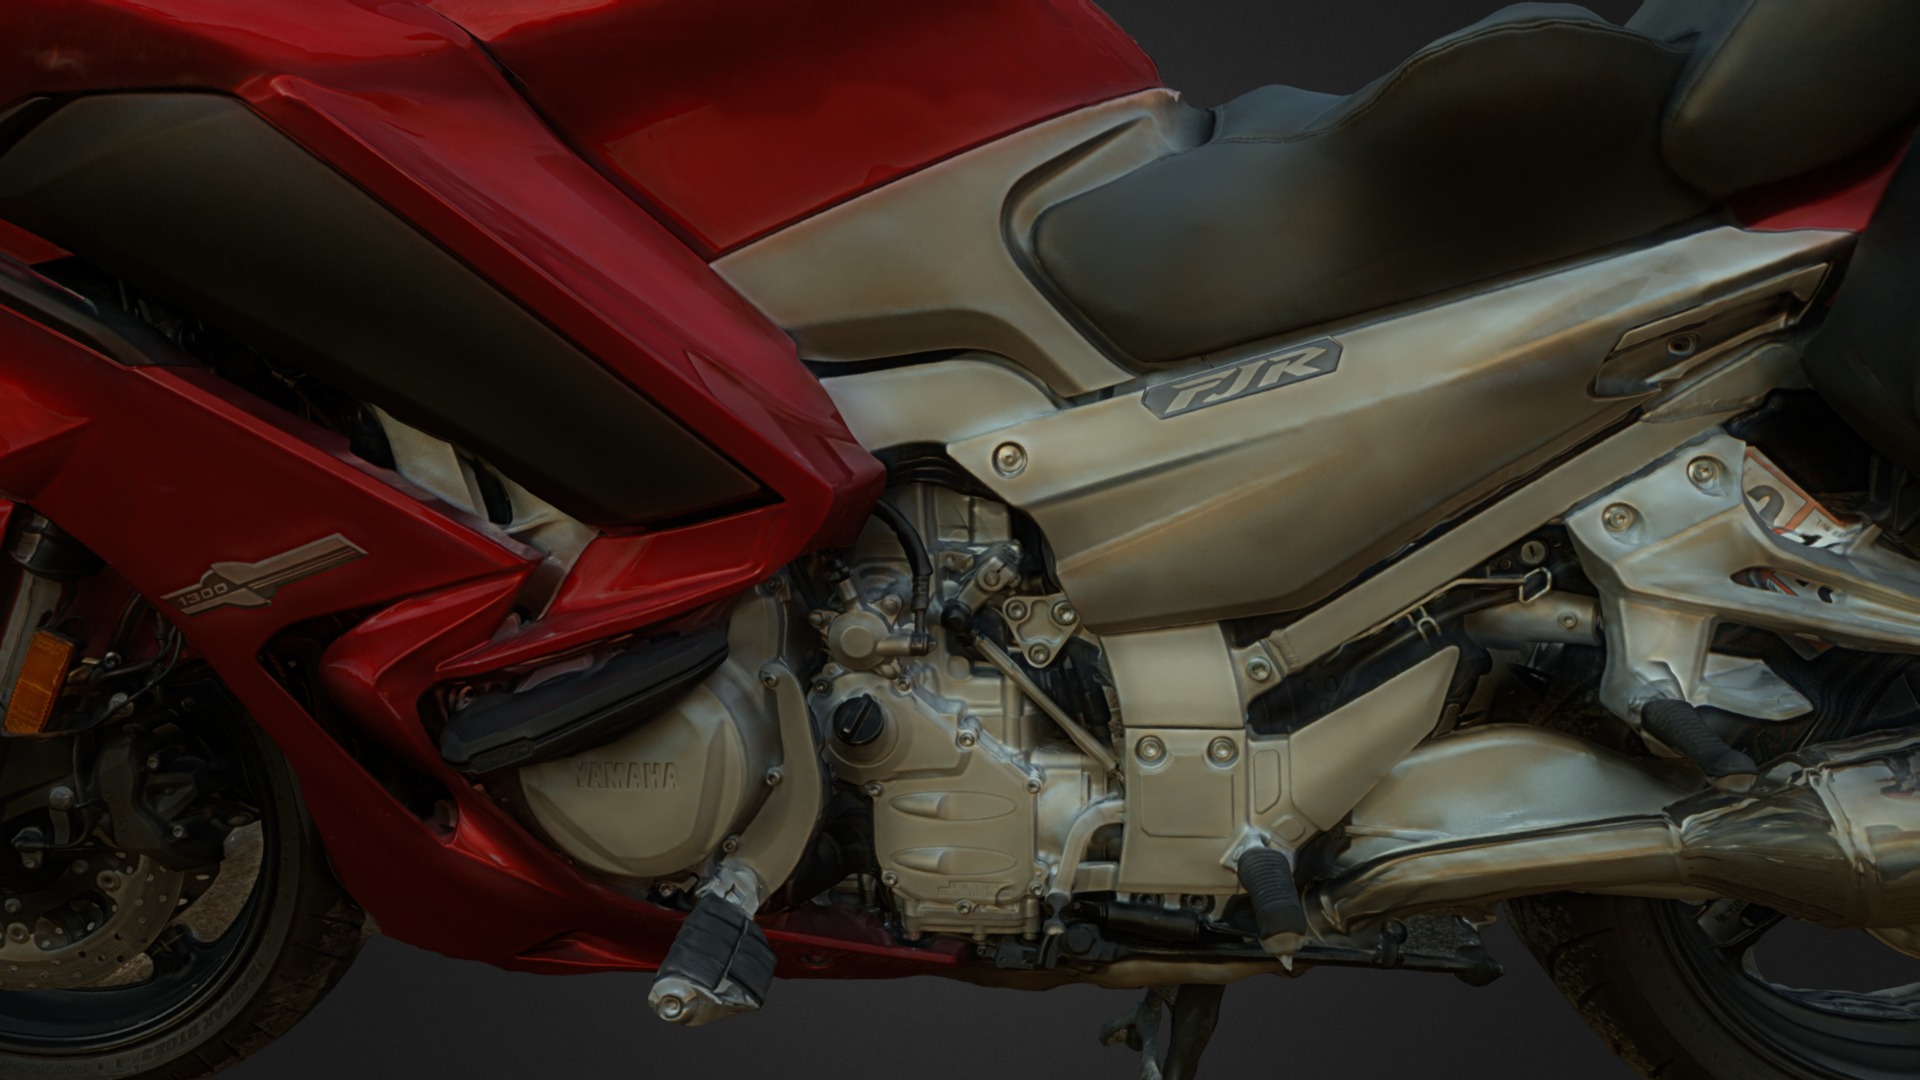 3D model Yamaha FJR - This is a 3D model of the Yamaha FJR. The 3D model is about a close-up of a motorcycle.